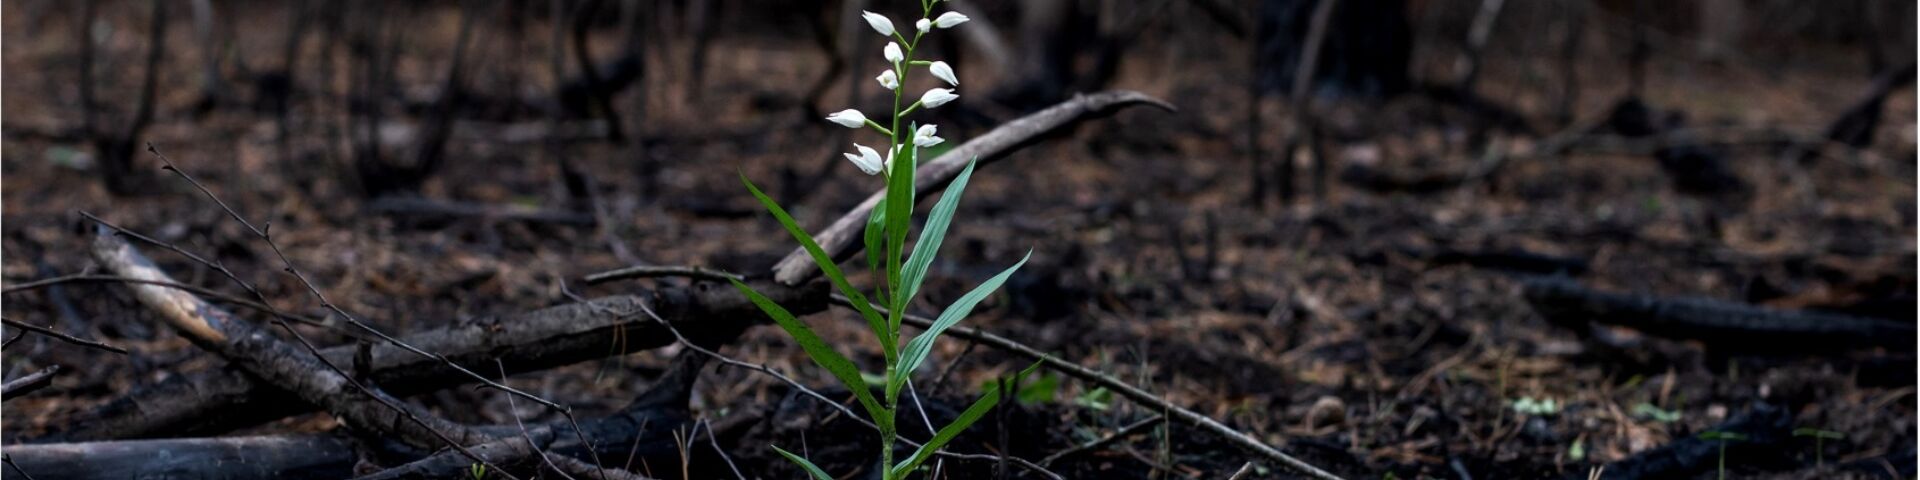 Delicate white flower grows in the forest after a devastating fire caused by climate change.